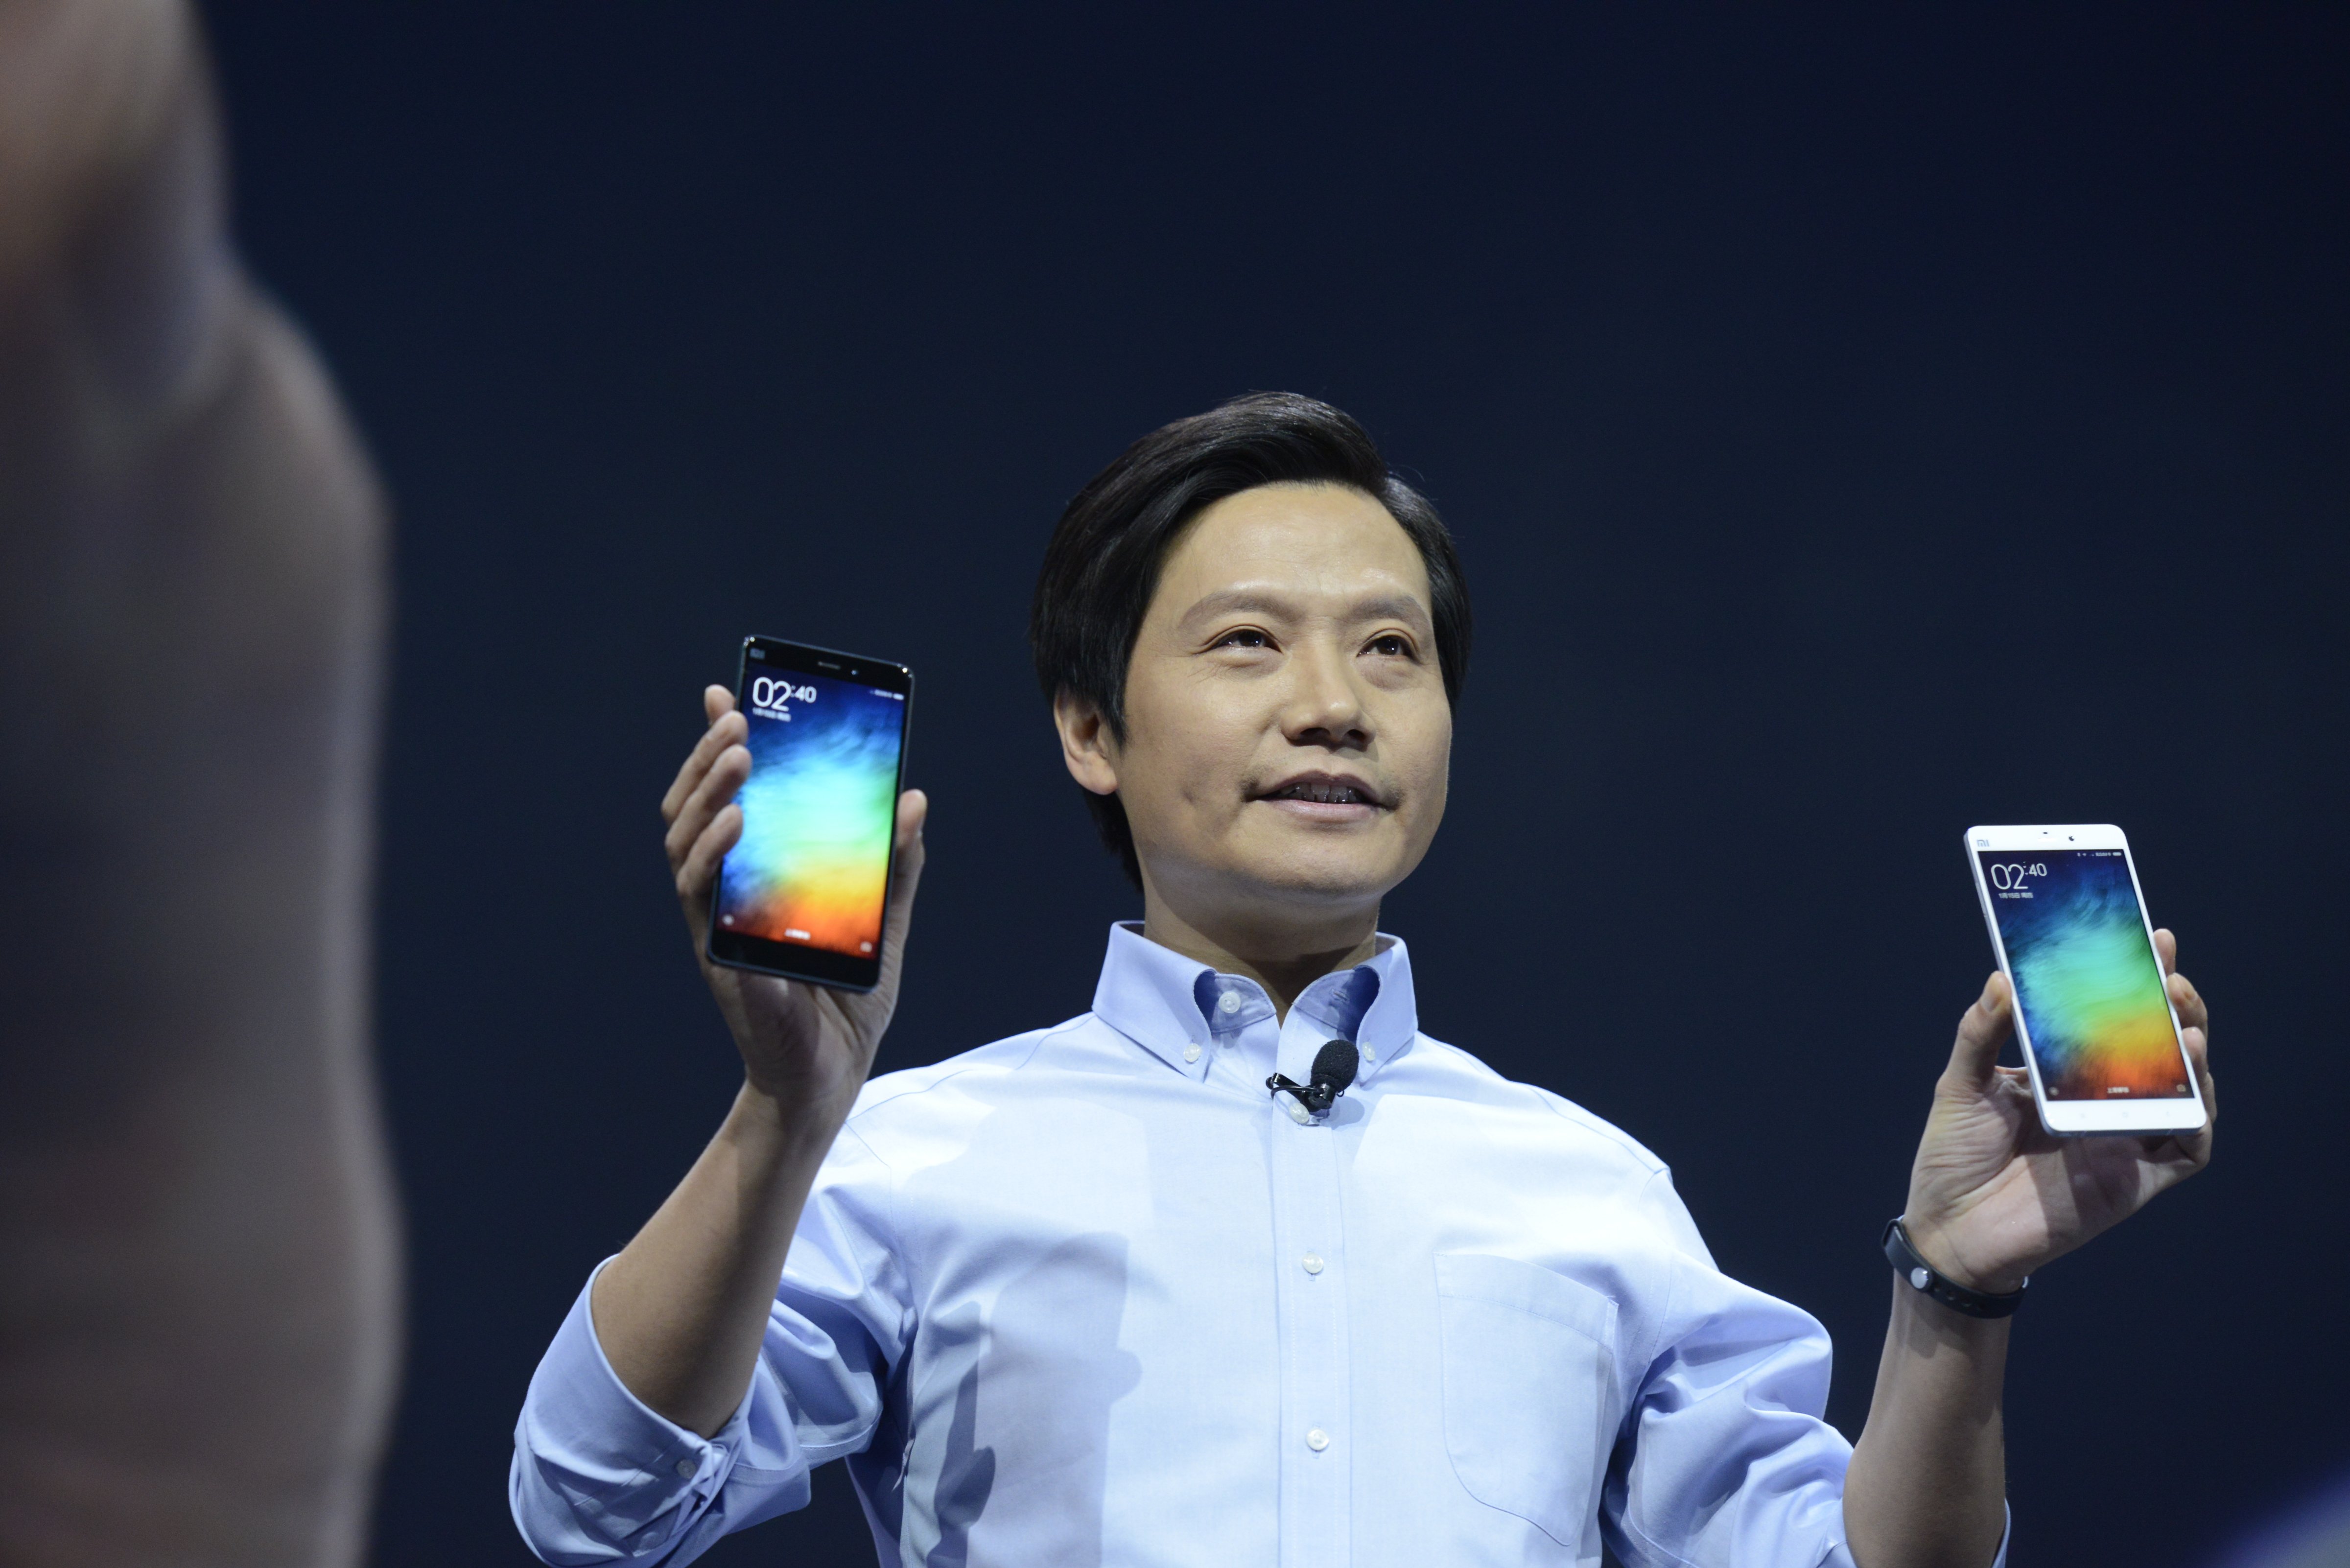 Lei Jun, chairman and CEO of China's Xiaomi Inc. presents the company's new product, the Mi Note on January 15, 2015 in Beijing, China. (ChinaFotoPress&mdash;ChinaFotoPress via Getty Images)